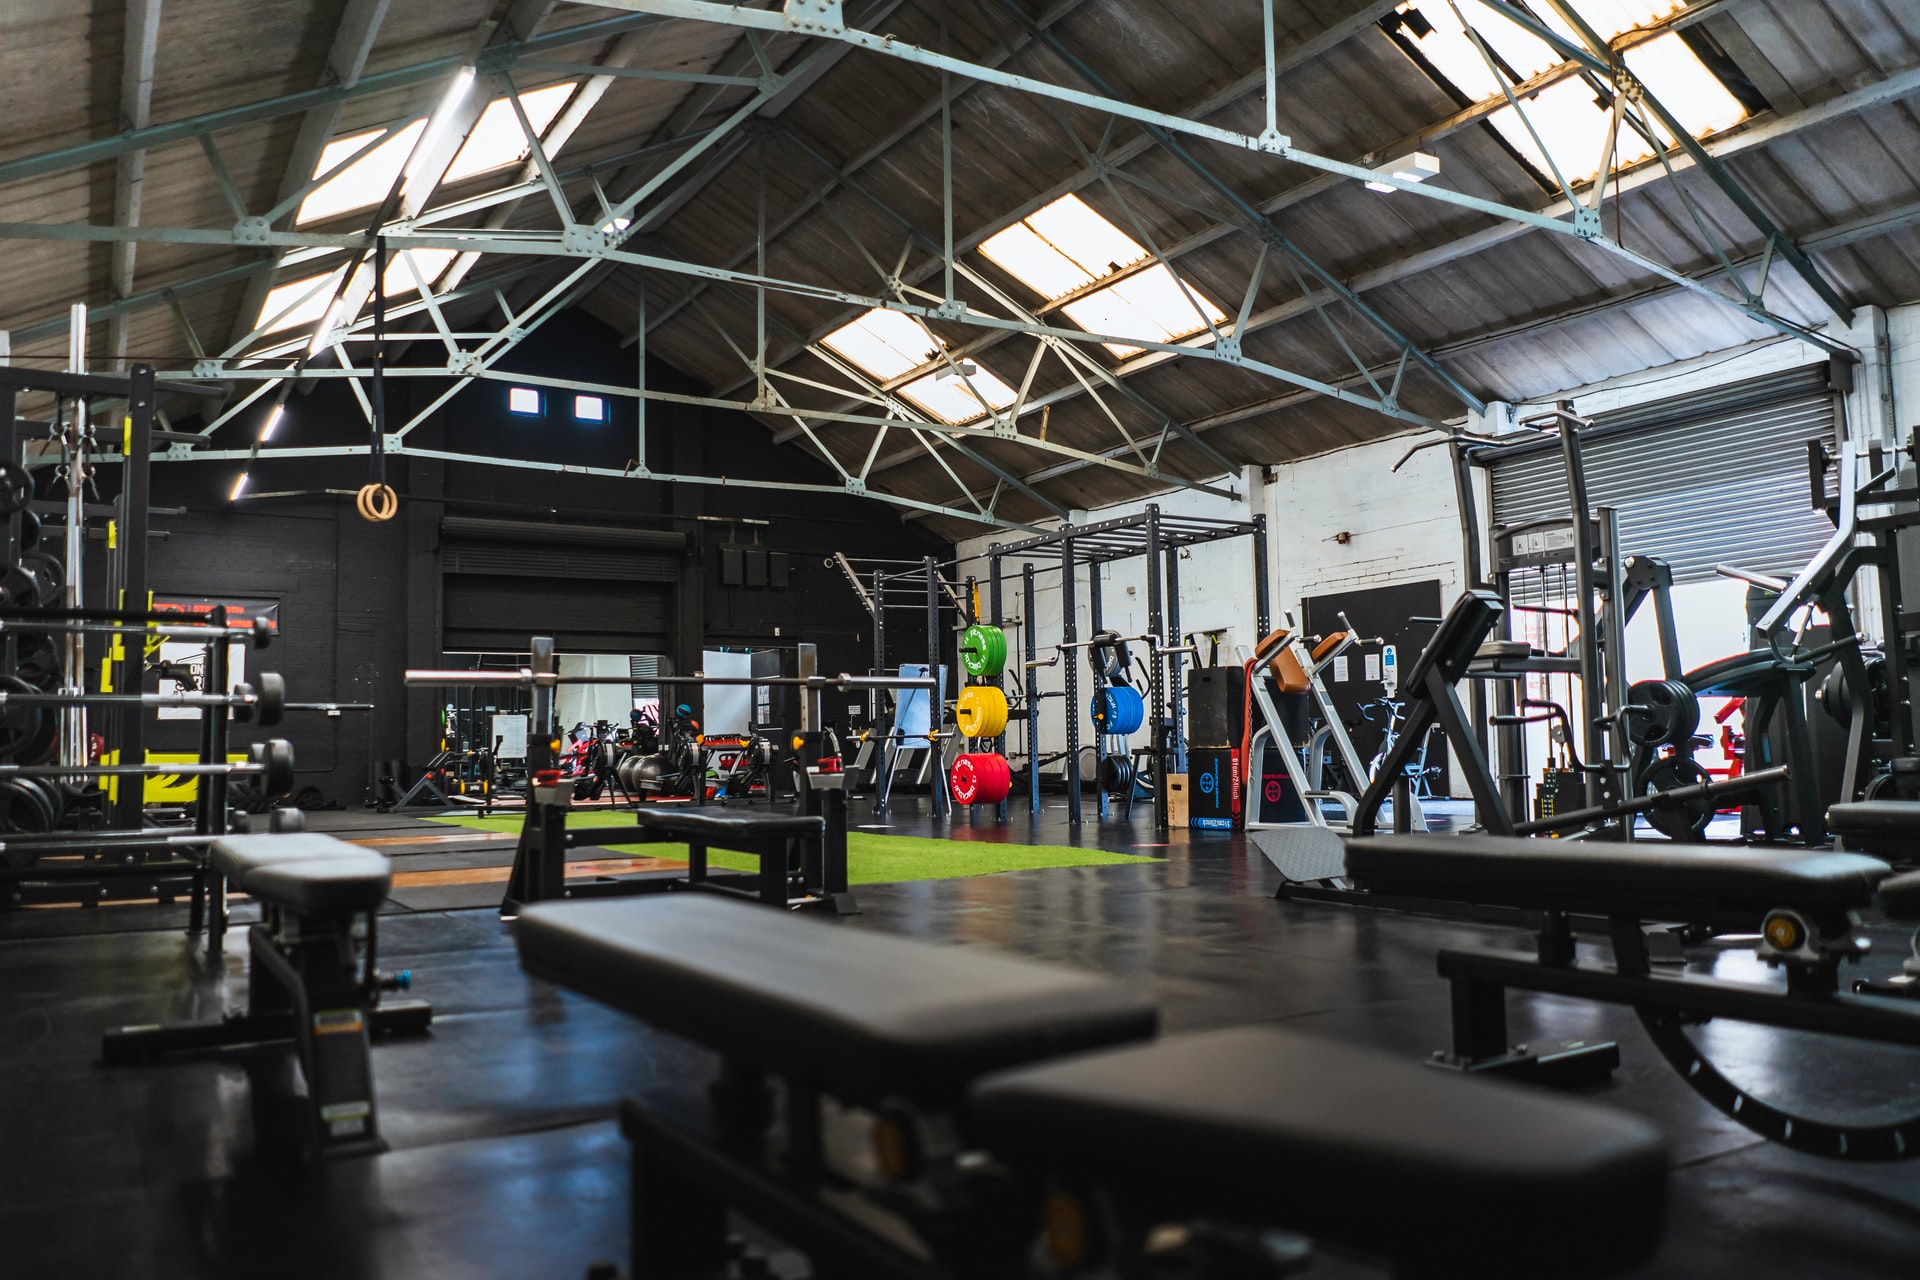 Classpass for Gyms/Studios – How Much Can You Make?